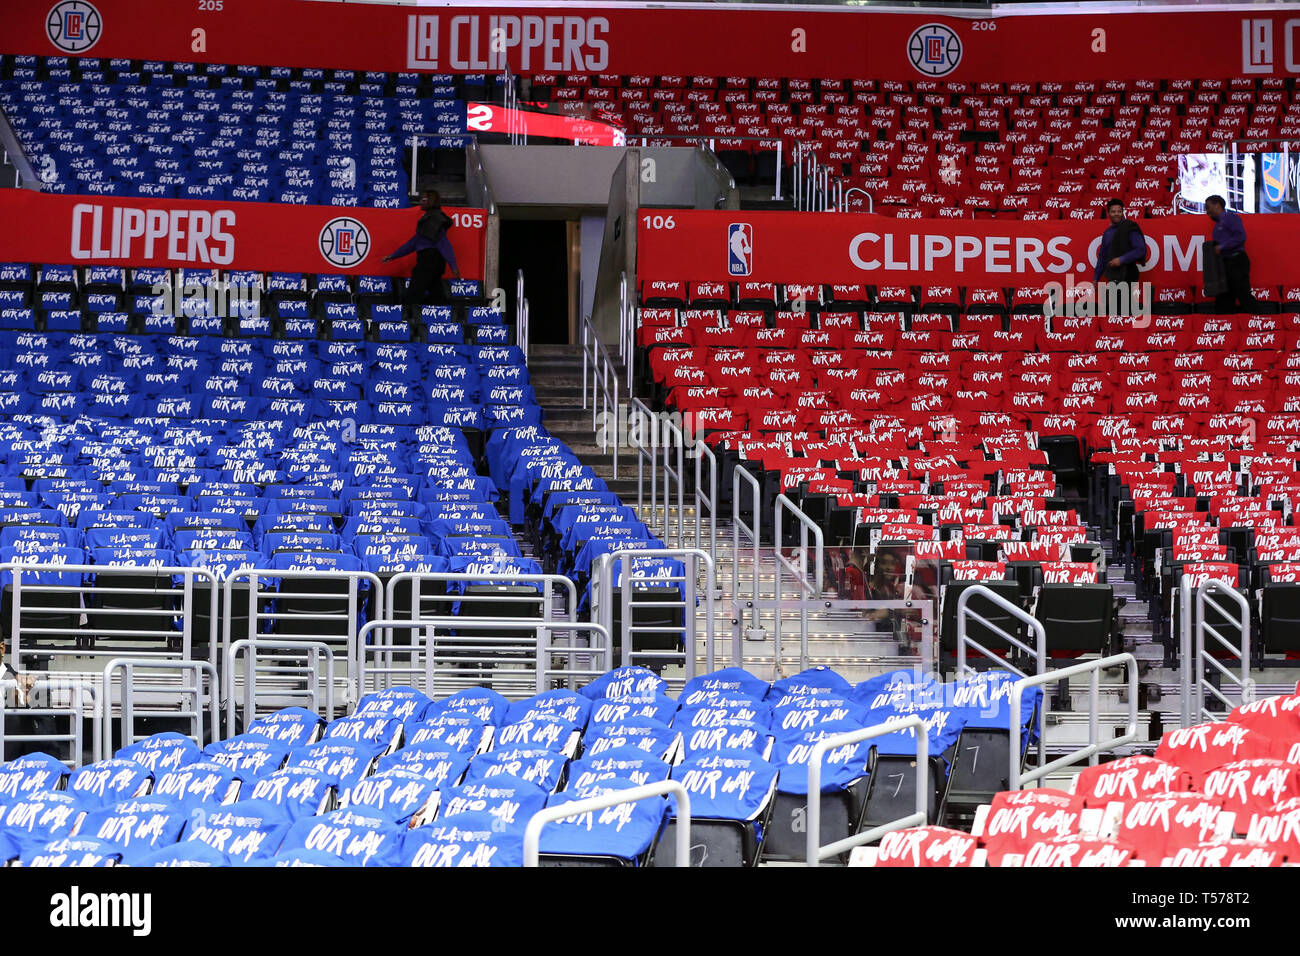 Los Angeles, CA, USA. 21st Apr, 2019. Clippers banners before game